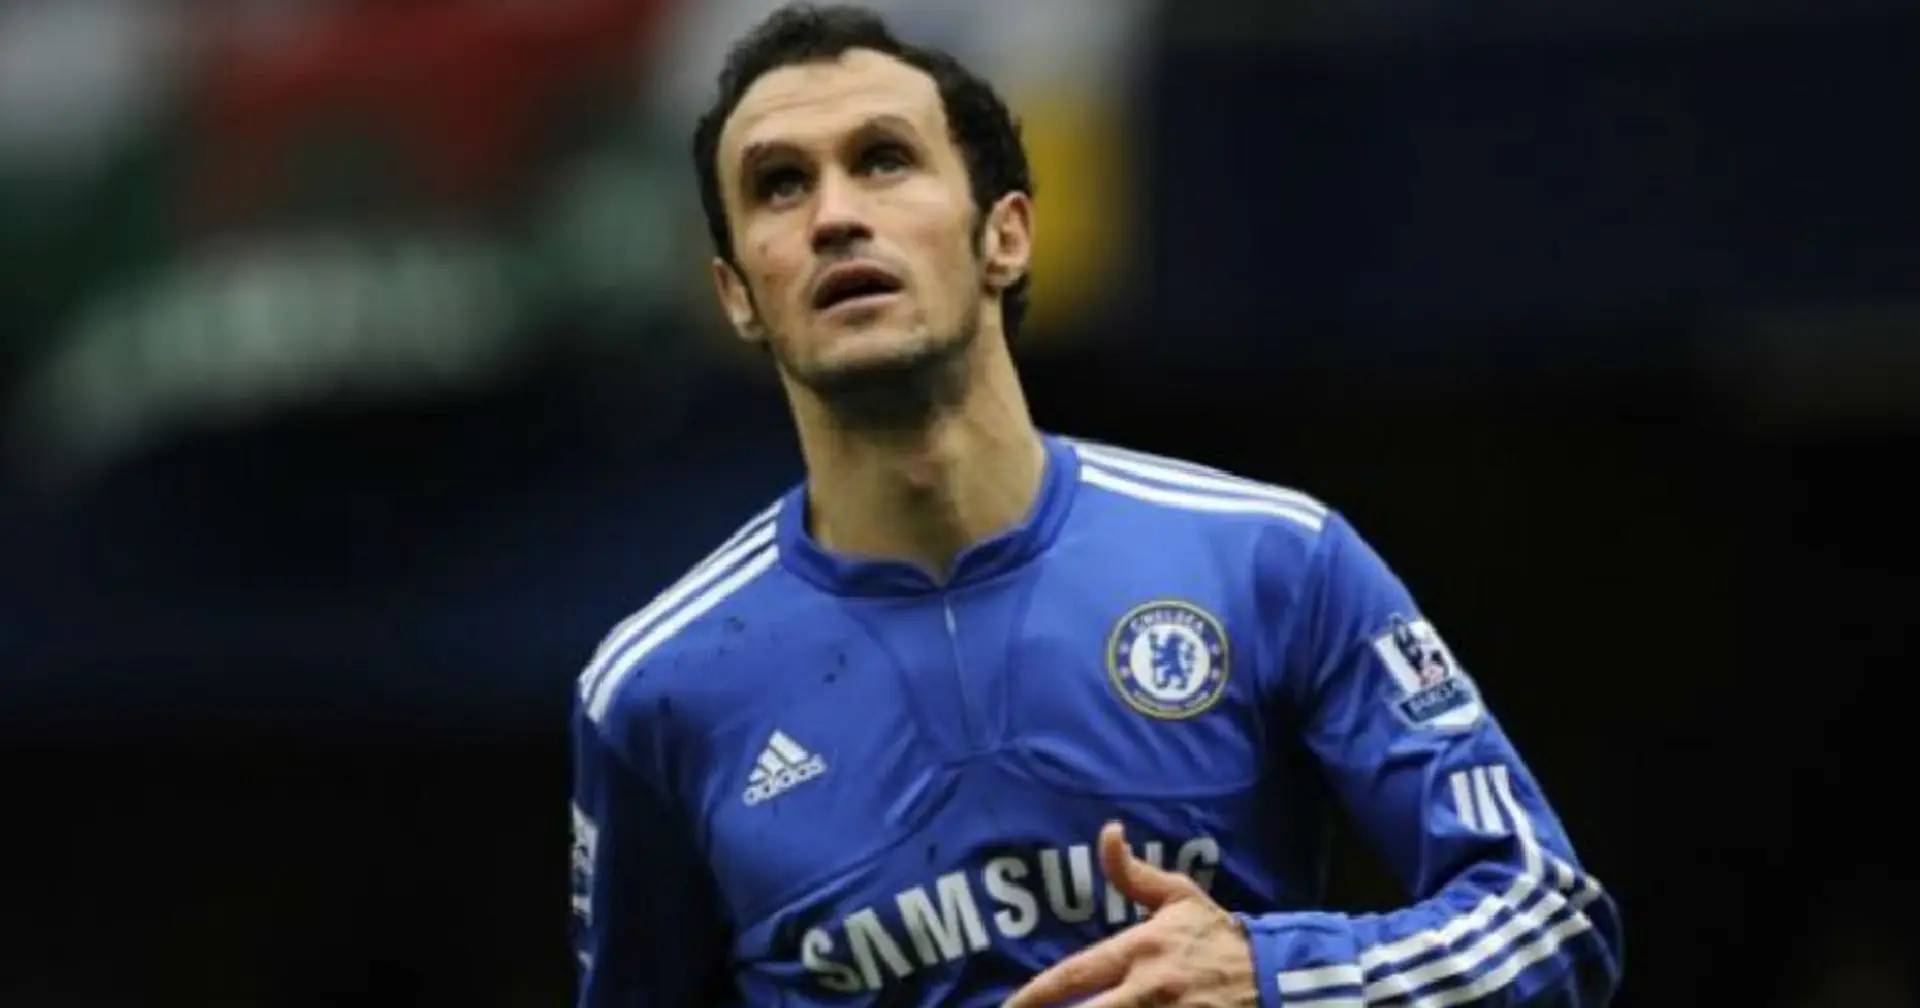 Ricardo Carvalho in 2010: 'It's harder to play for Chelsea than Real Madrid'